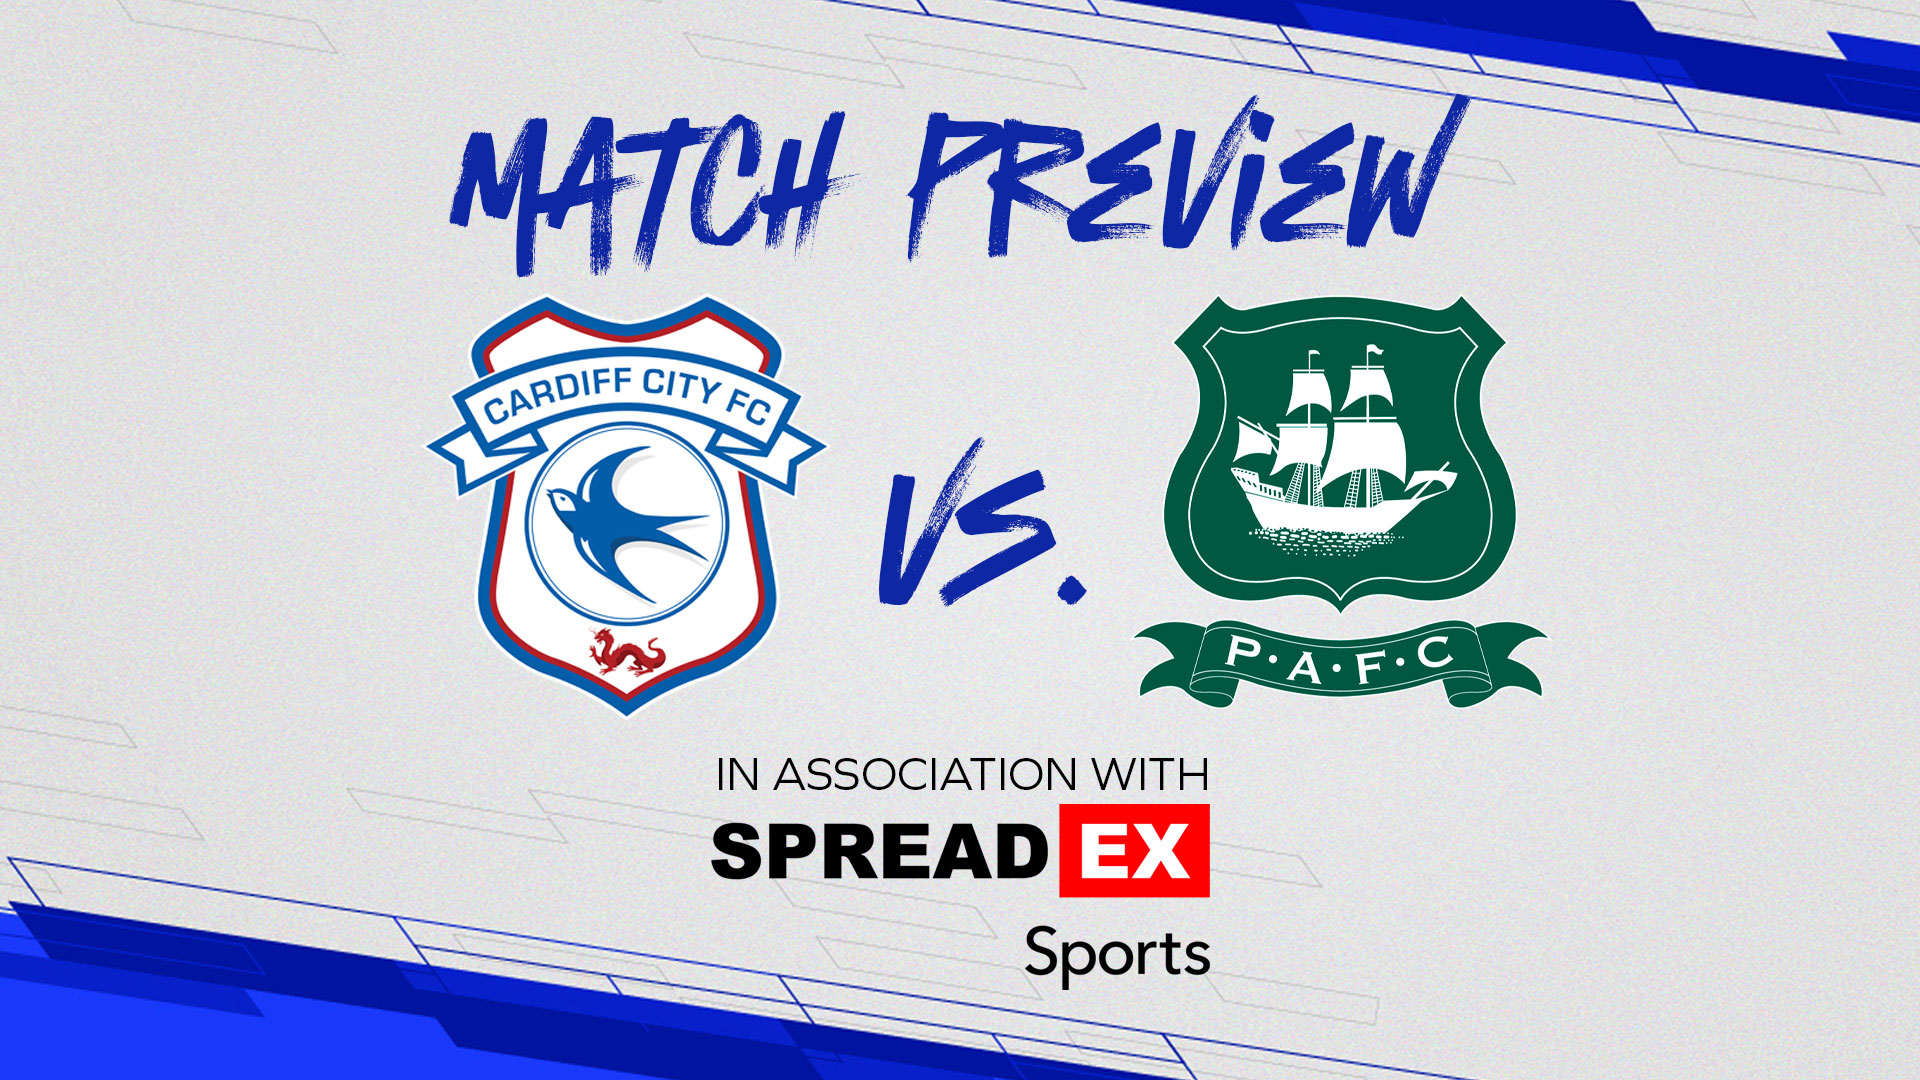 Match Preview: Cardiff City vs. Plymouth Argyle